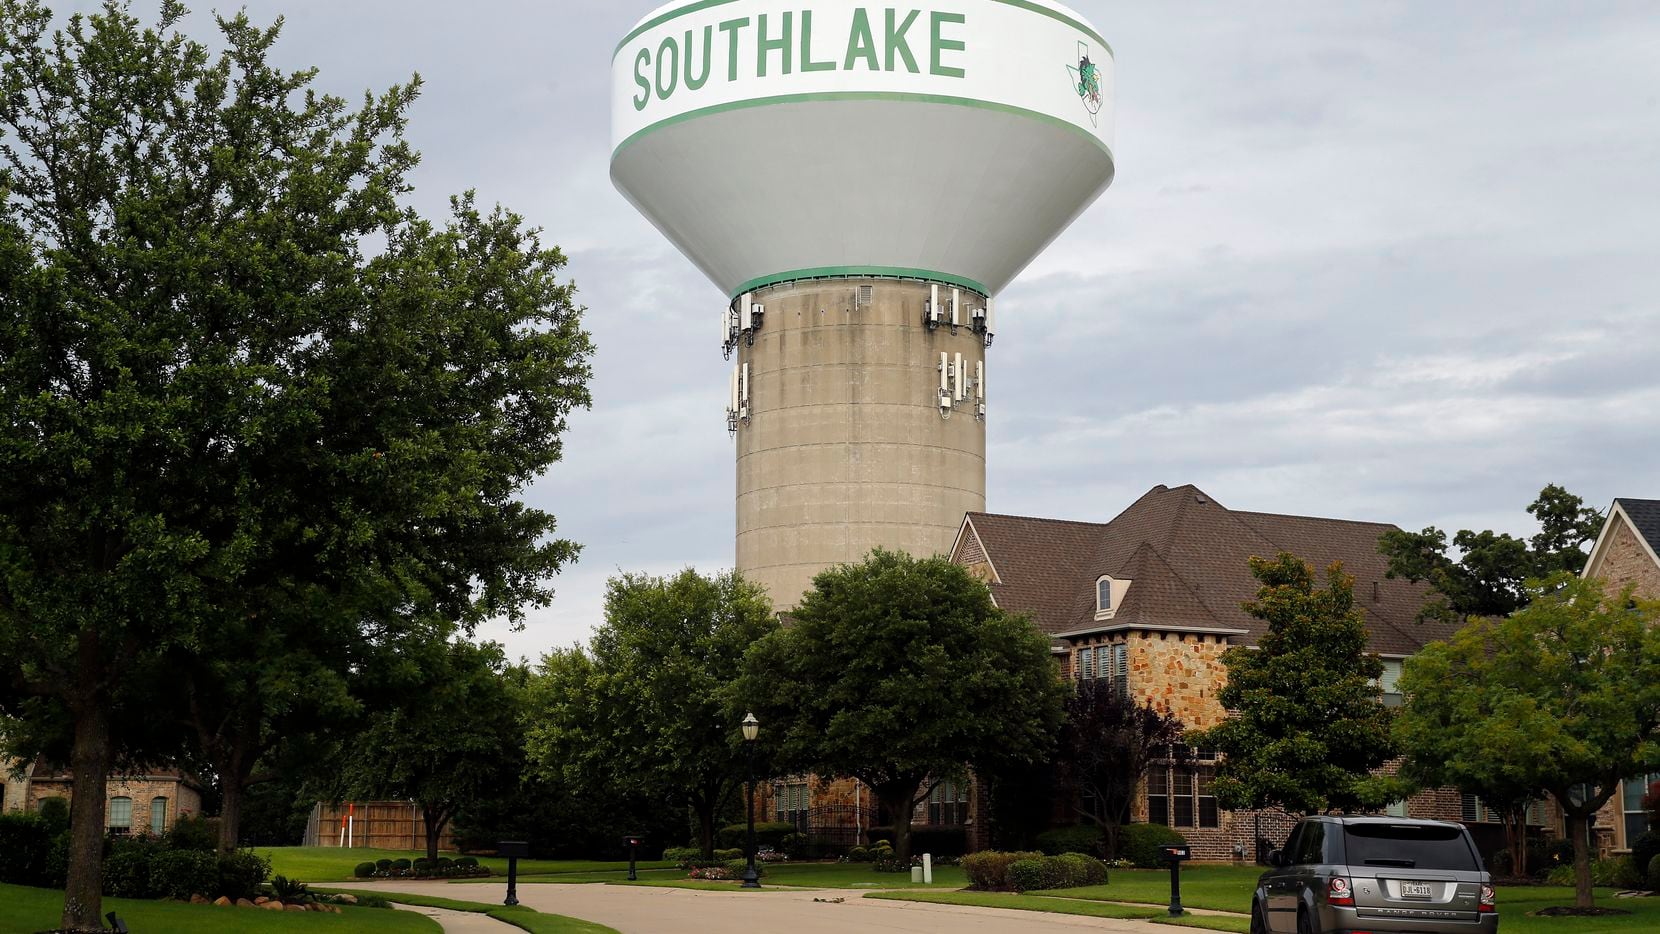 A buyer recently offered $300,000 over asking price for a million-dollar home in Southlake.